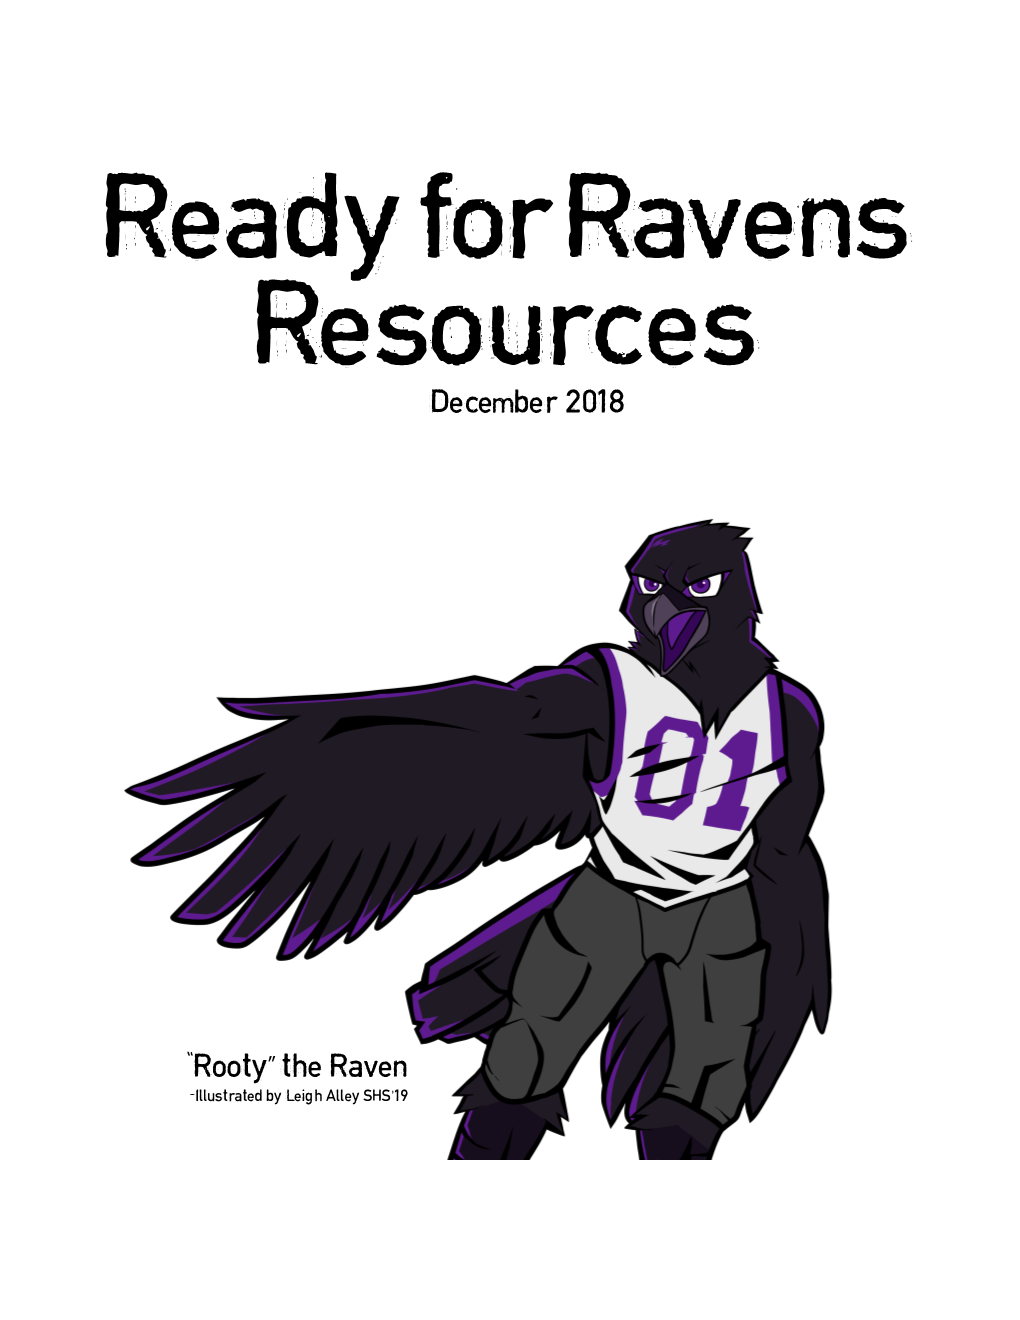 Ready for Ravens Resources December 2018